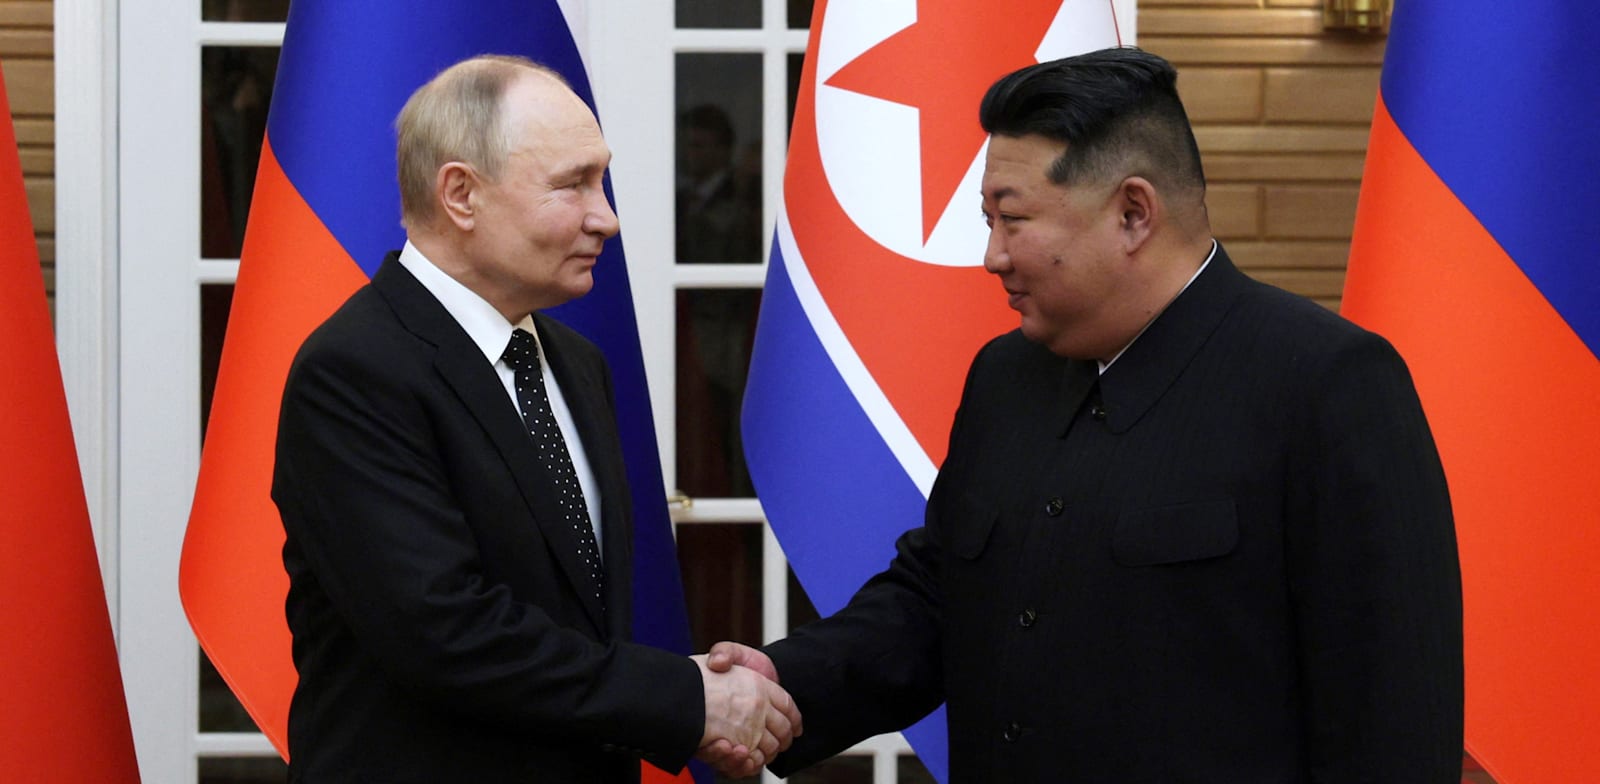 “A close and dangerous relationship”: Putin makes an alliance with North Korea